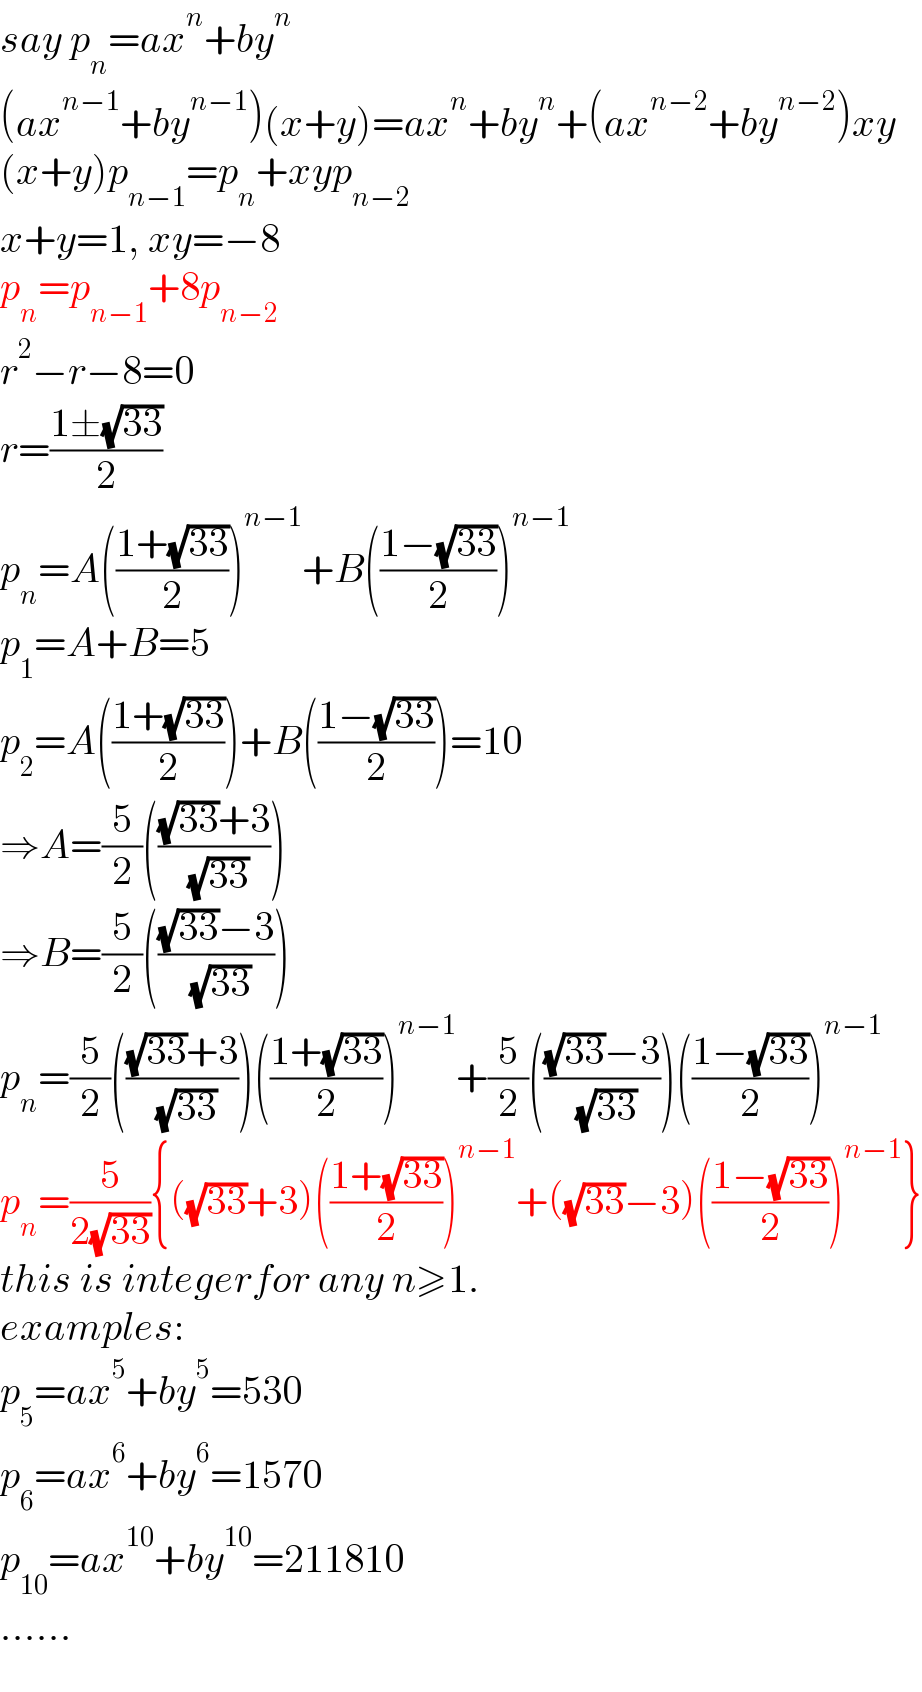 say p_n =ax^n +by^n   (ax^(n−1) +by^(n−1) )(x+y)=ax^n +by^n +(ax^(n−2) +by^(n−2) )xy  (x+y)p_(n−1) =p_n +xyp_(n−2)   x+y=1, xy=−8  p_n =p_(n−1) +8p_(n−2)   r^2 −r−8=0  r=((1±(√(33)))/2)  p_n =A(((1+(√(33)))/2))^(n−1) +B(((1−(√(33)))/2))^(n−1)   p_1 =A+B=5  p_2 =A(((1+(√(33)))/2))+B(((1−(√(33)))/2))=10  ⇒A=(5/2)((((√(33))+3)/( (√(33)))))  ⇒B=(5/2)((((√(33))−3)/( (√(33)))))  p_n =(5/2)((((√(33))+3)/( (√(33)))))(((1+(√(33)))/2))^(n−1) +(5/2)((((√(33))−3)/( (√(33)))))(((1−(√(33)))/2))^(n−1)   p_n =(5/(2(√(33)))){((√(33))+3)(((1+(√(33)))/2))^(n−1) +((√(33))−3)(((1−(√(33)))/2))^(n−1) }  this is integerfor any n≥1.  examples:  p_5 =ax^5 +by^5 =530  p_6 =ax^6 +by^6 =1570  p_(10) =ax^(10) +by^(10) =211810  ......  